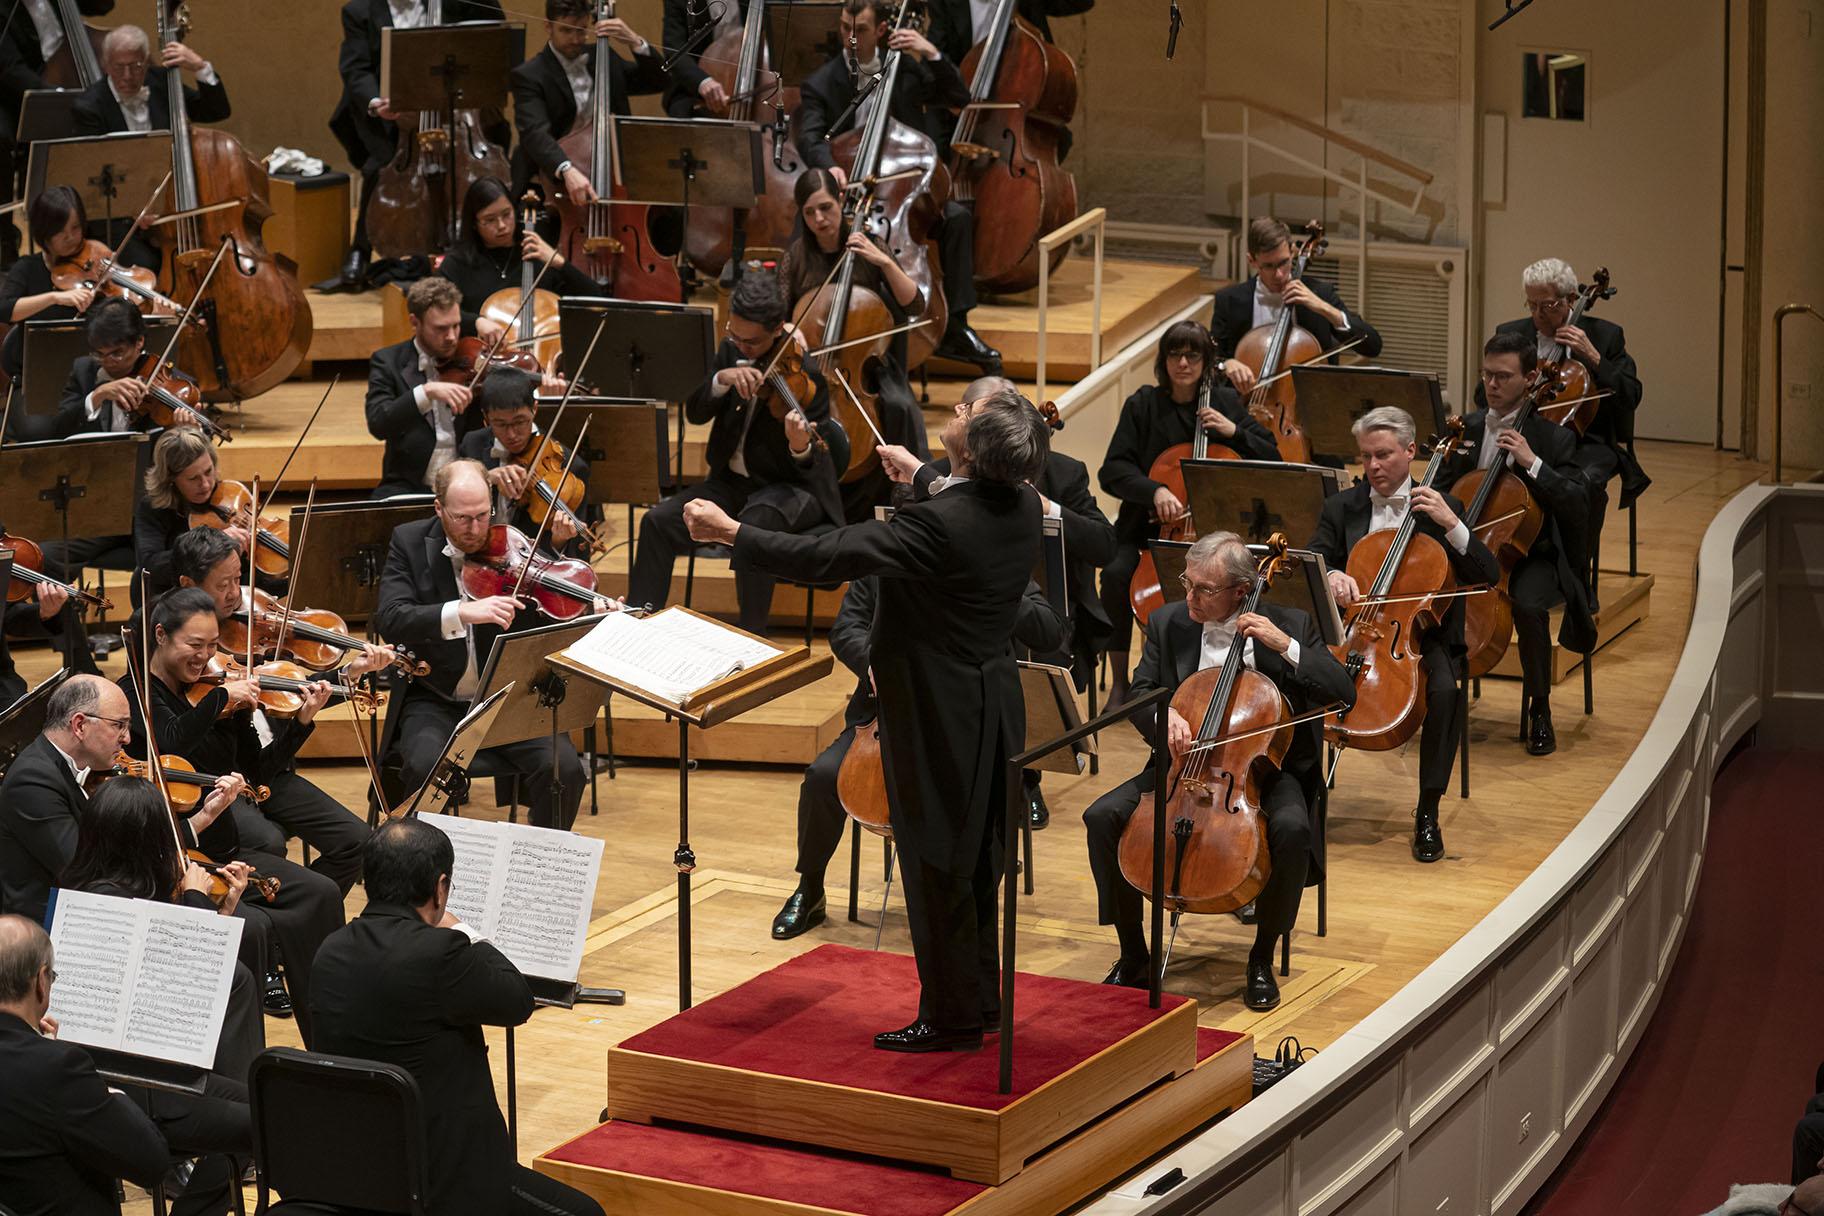 Zell Music Director Riccardo Muti conducts the Chicago Symphony Orchestra in a program featuring Beethoven’s Second and Fifth Symphonies on Feb. 20, 2020. (Credit: Todd Rosenberg)